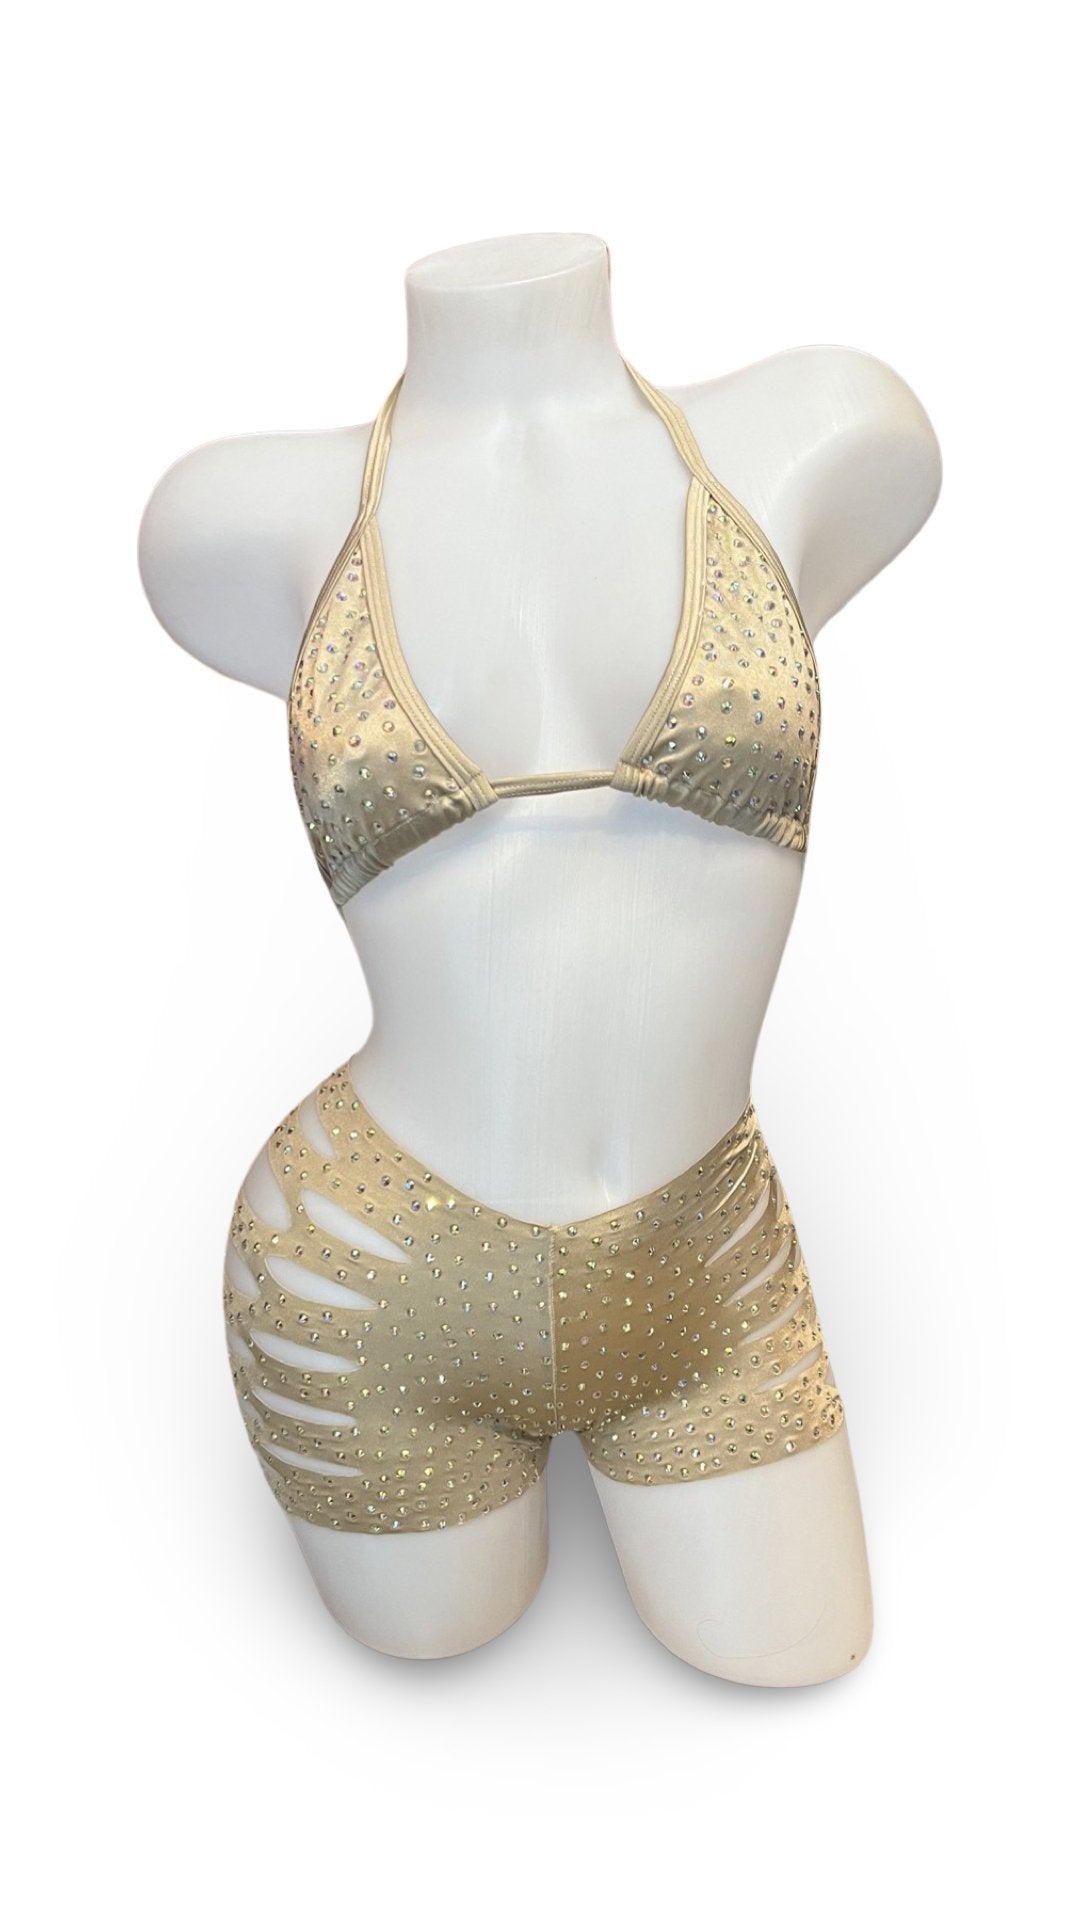 Rhinestone Triangle Top and Cut Out Short Set Champagne - Model Express VancouverBikini